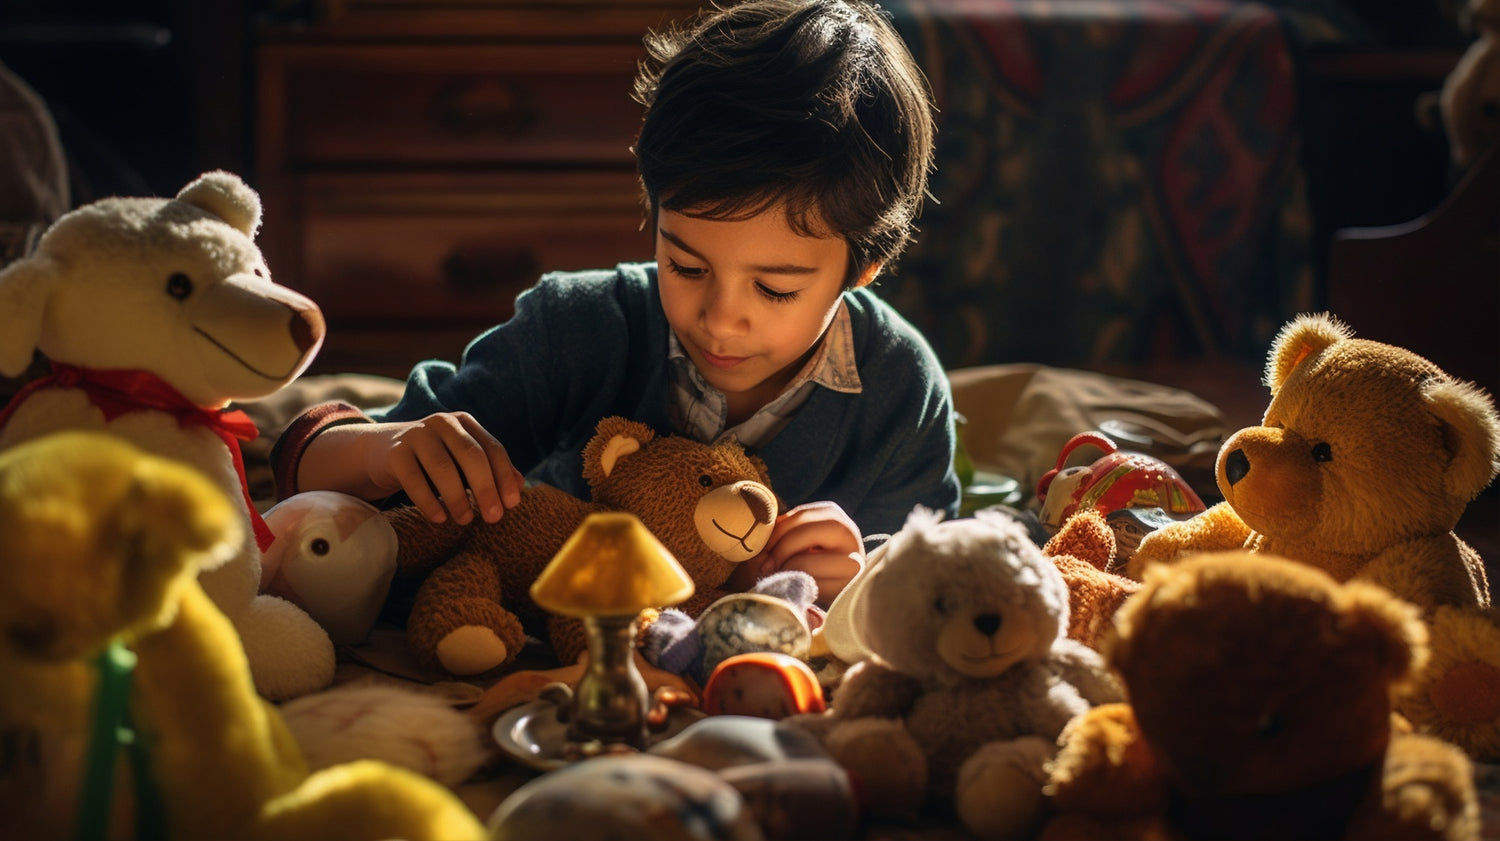 The Impact of Educational Toys on Child Development